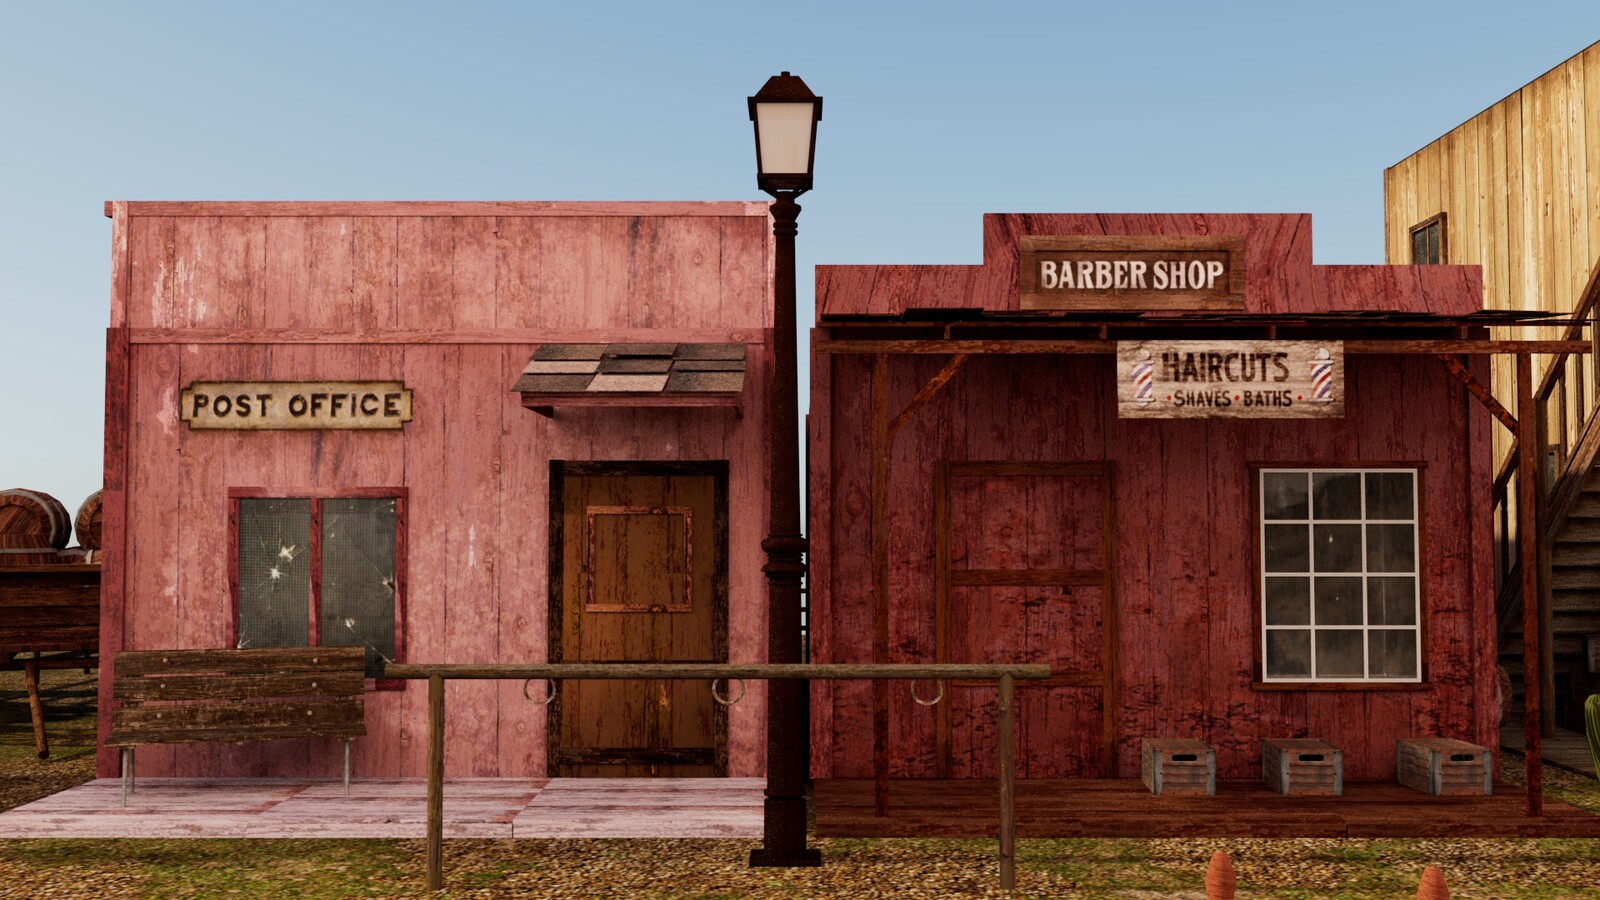 Post office and barber shop.